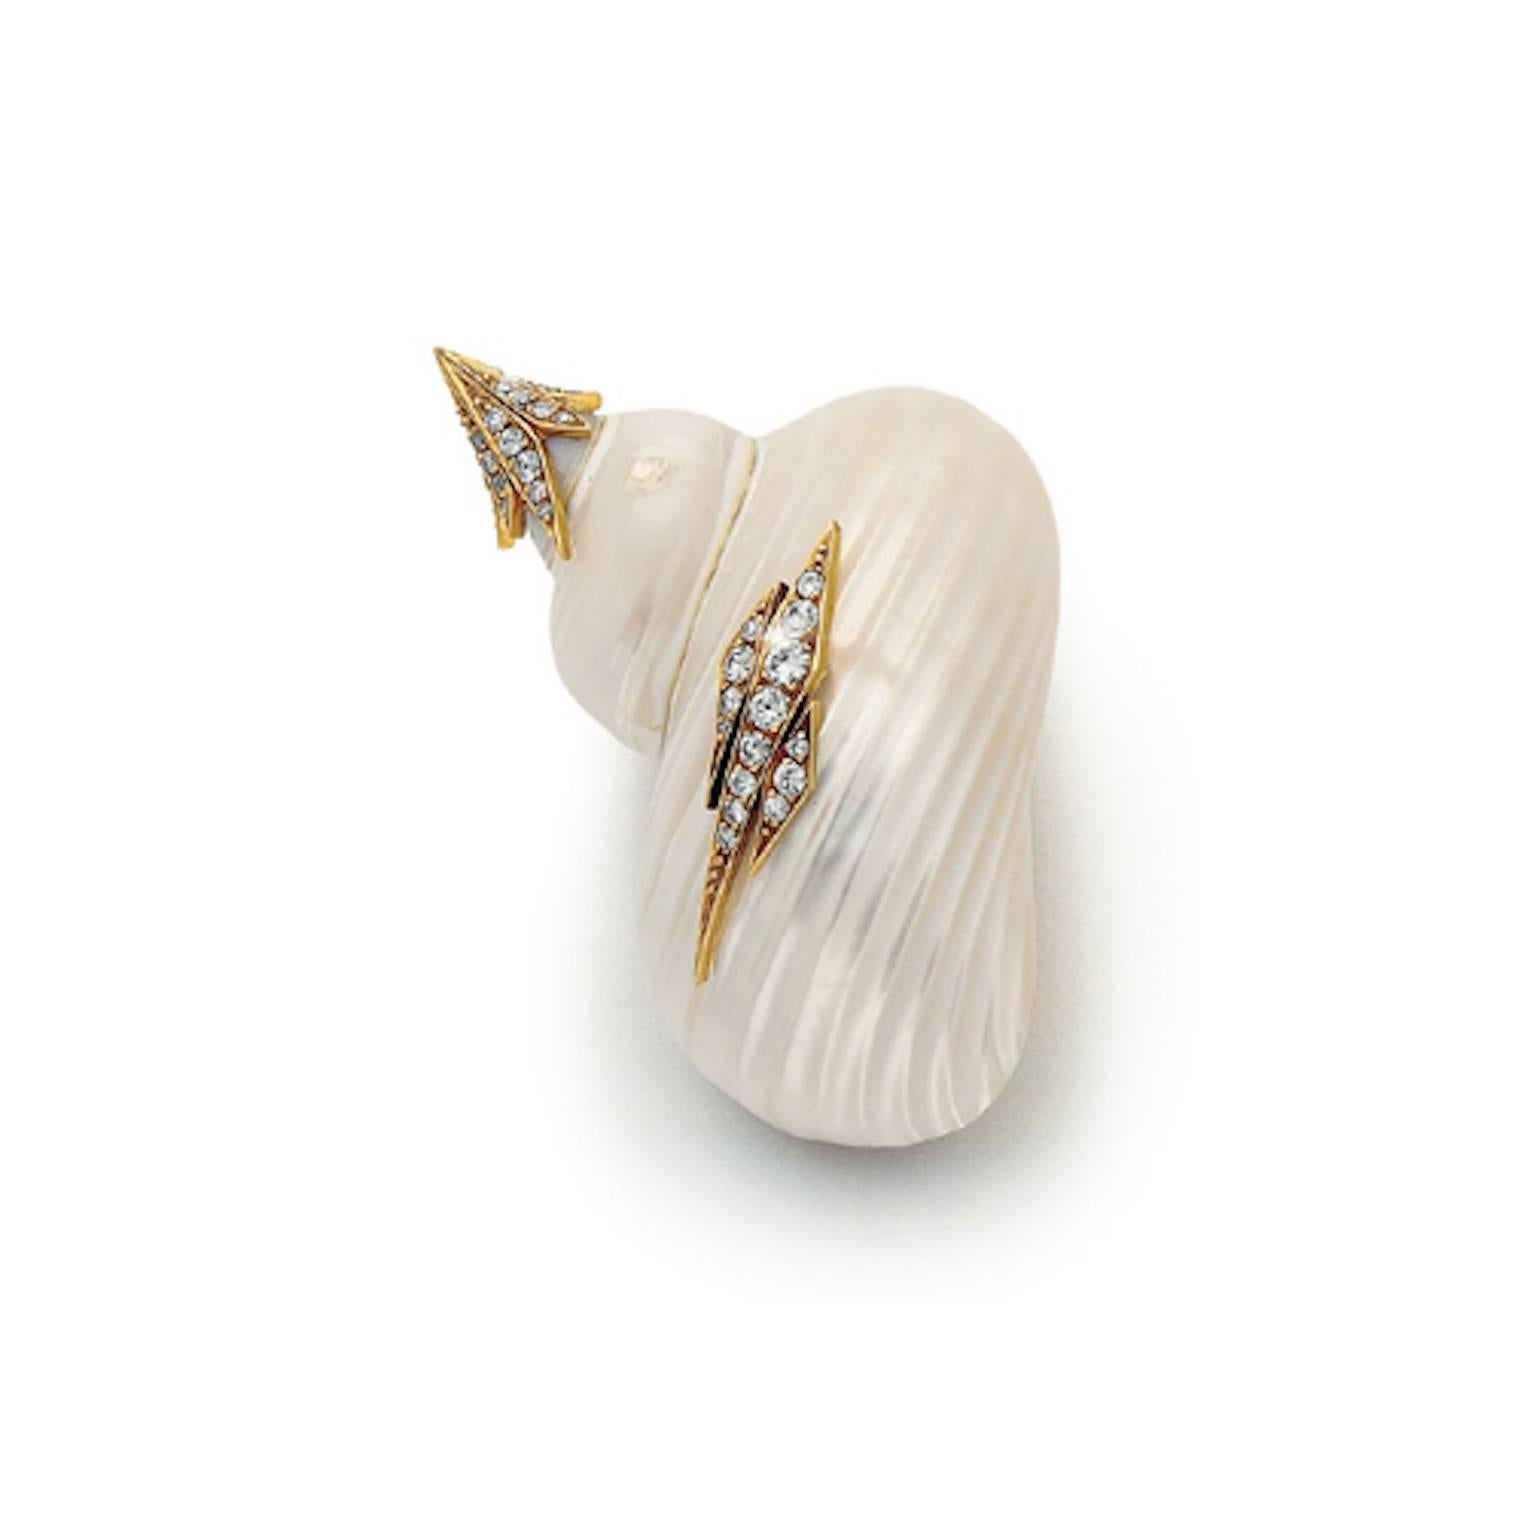 Polished periwinkle shell mounted with 18k gold on the side and point and set with diamonds. It is marked 